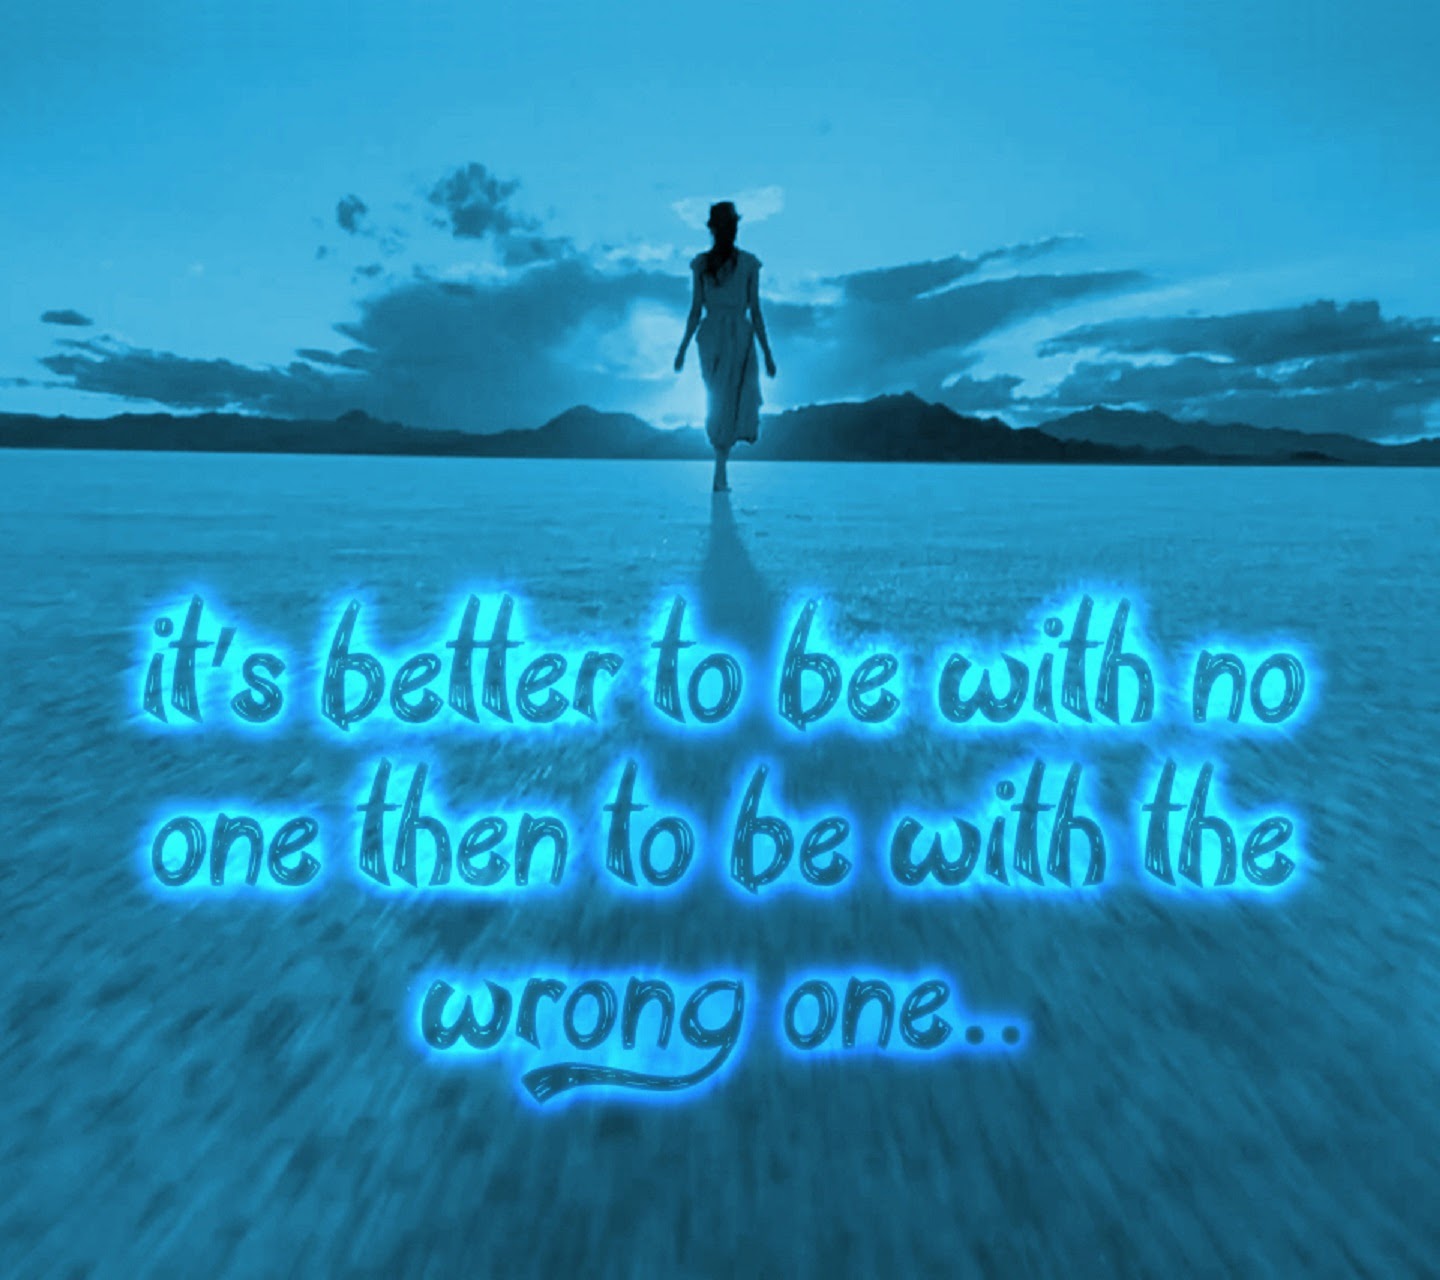 http://best-quotes-and-sayings.blogspot.com/2013/12/wrong-one.html